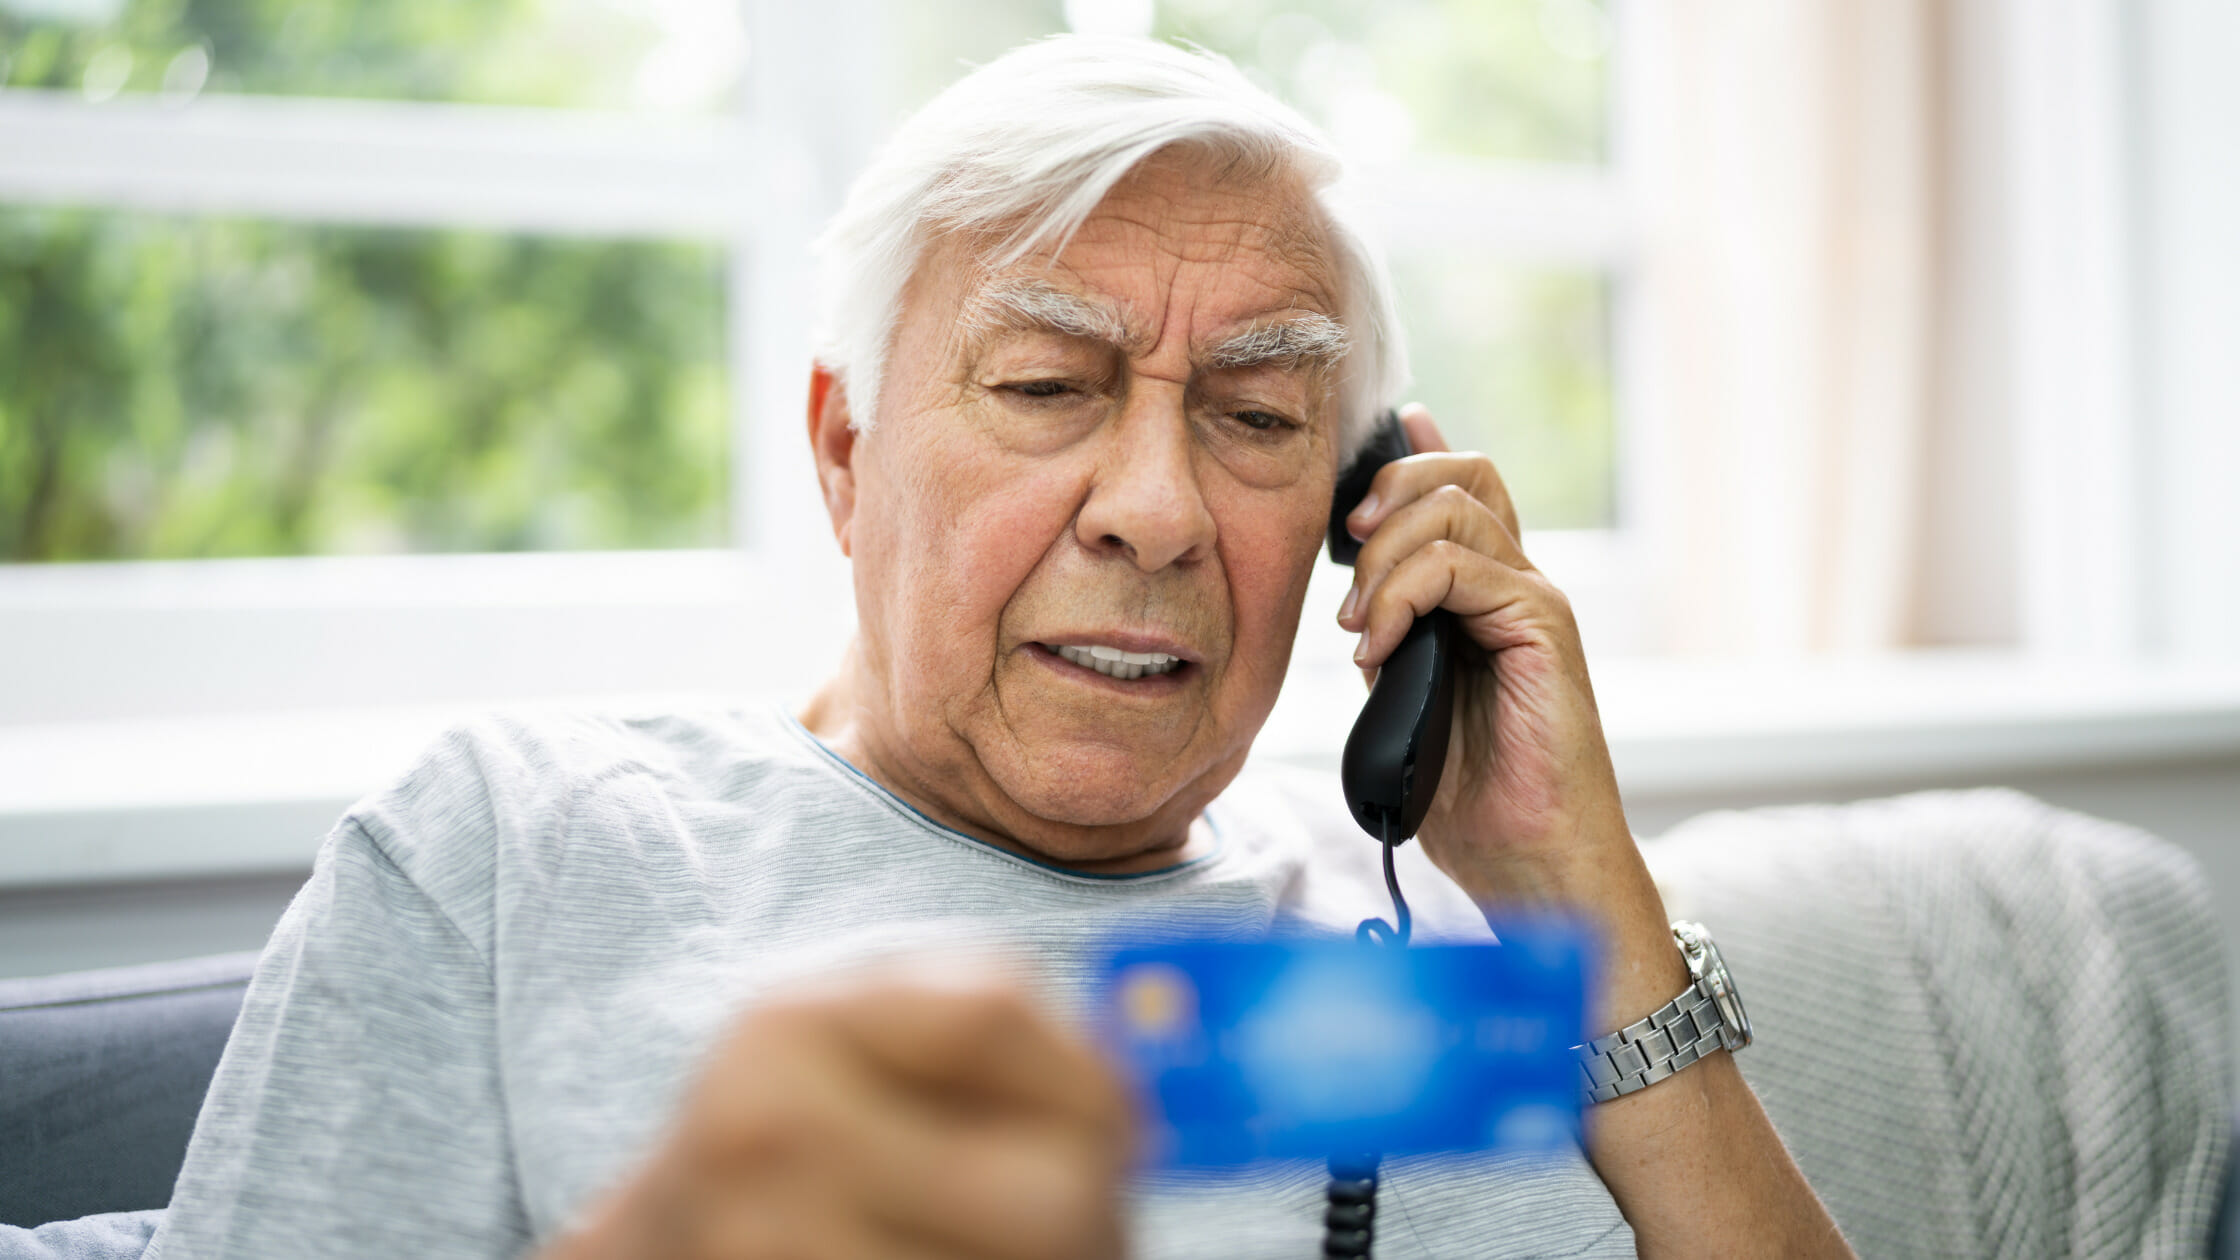 elderly man talking on the phone while holding his credit or debit card.